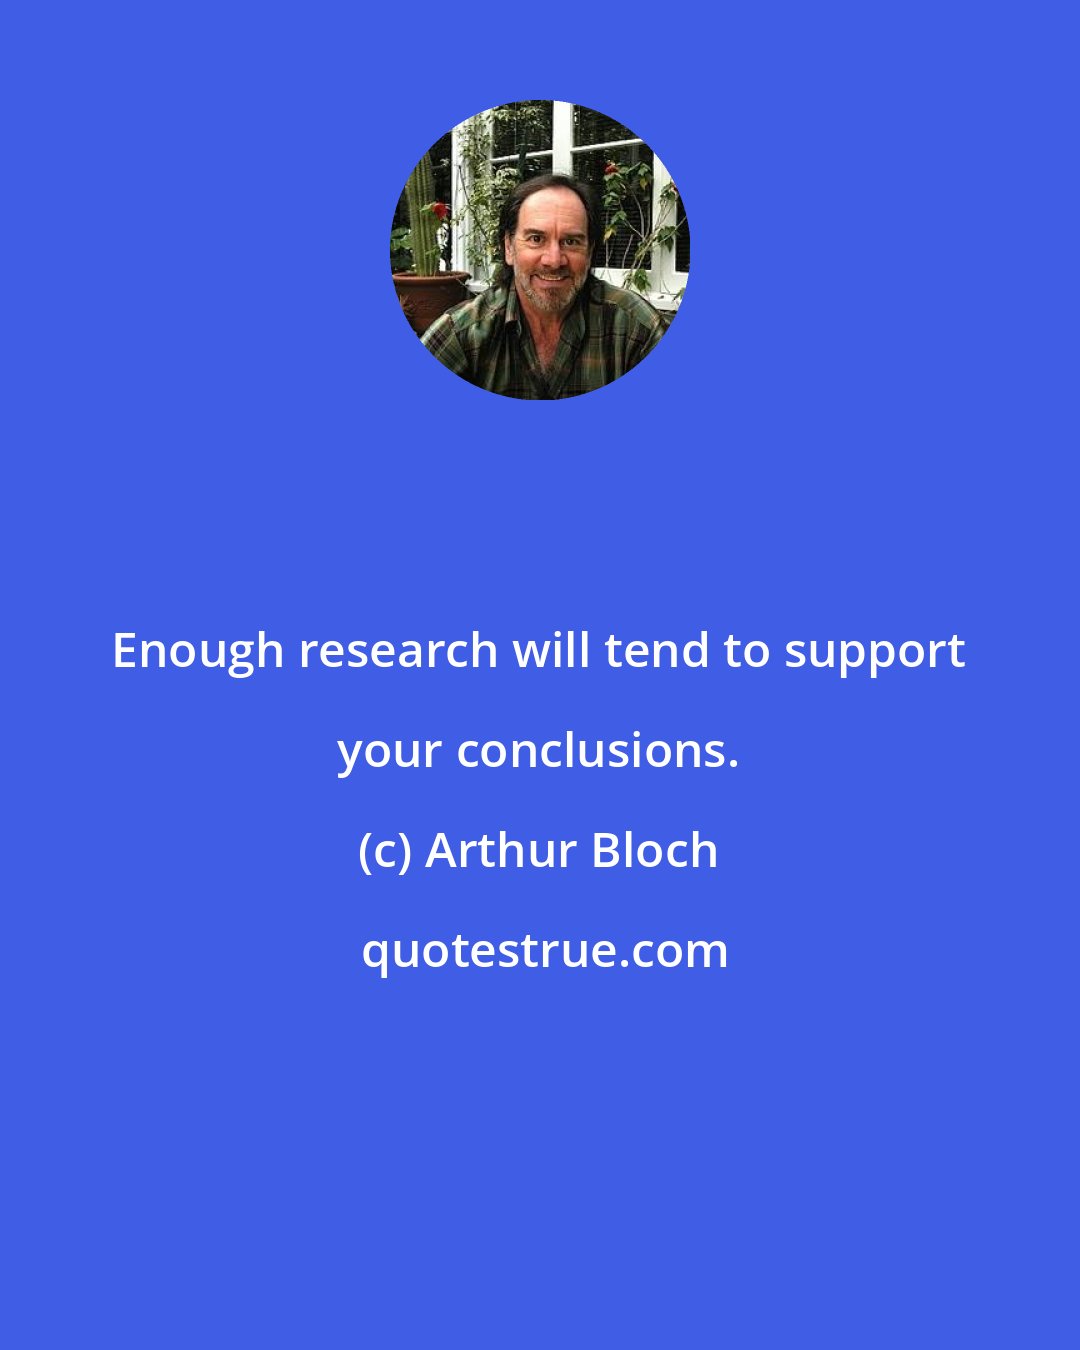 Arthur Bloch: Enough research will tend to support your conclusions.